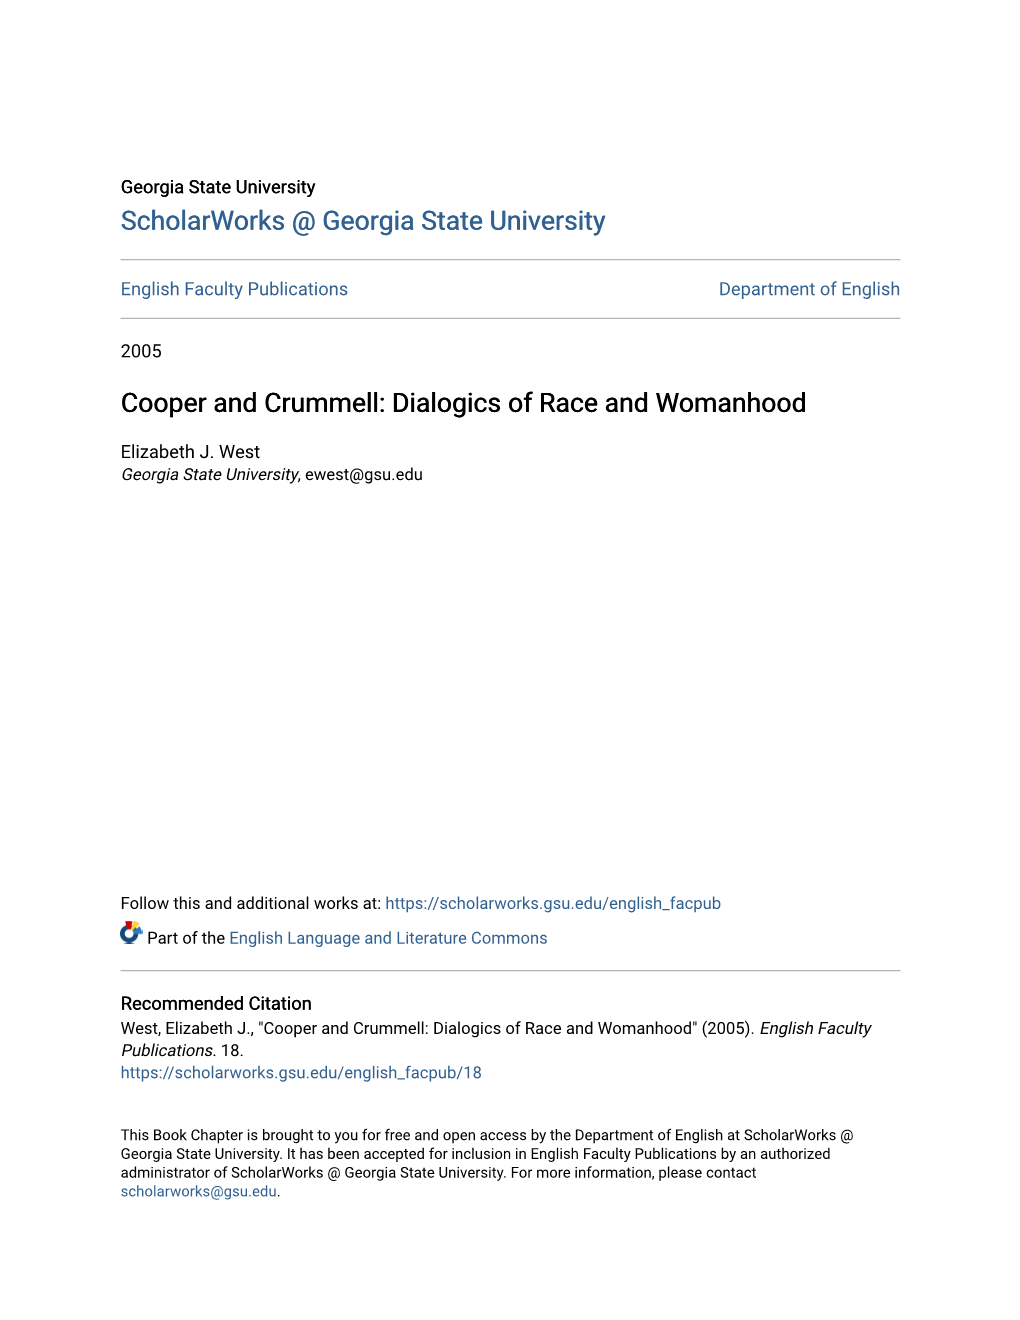 Cooper and Crummell: Dialogics of Race and Womanhood